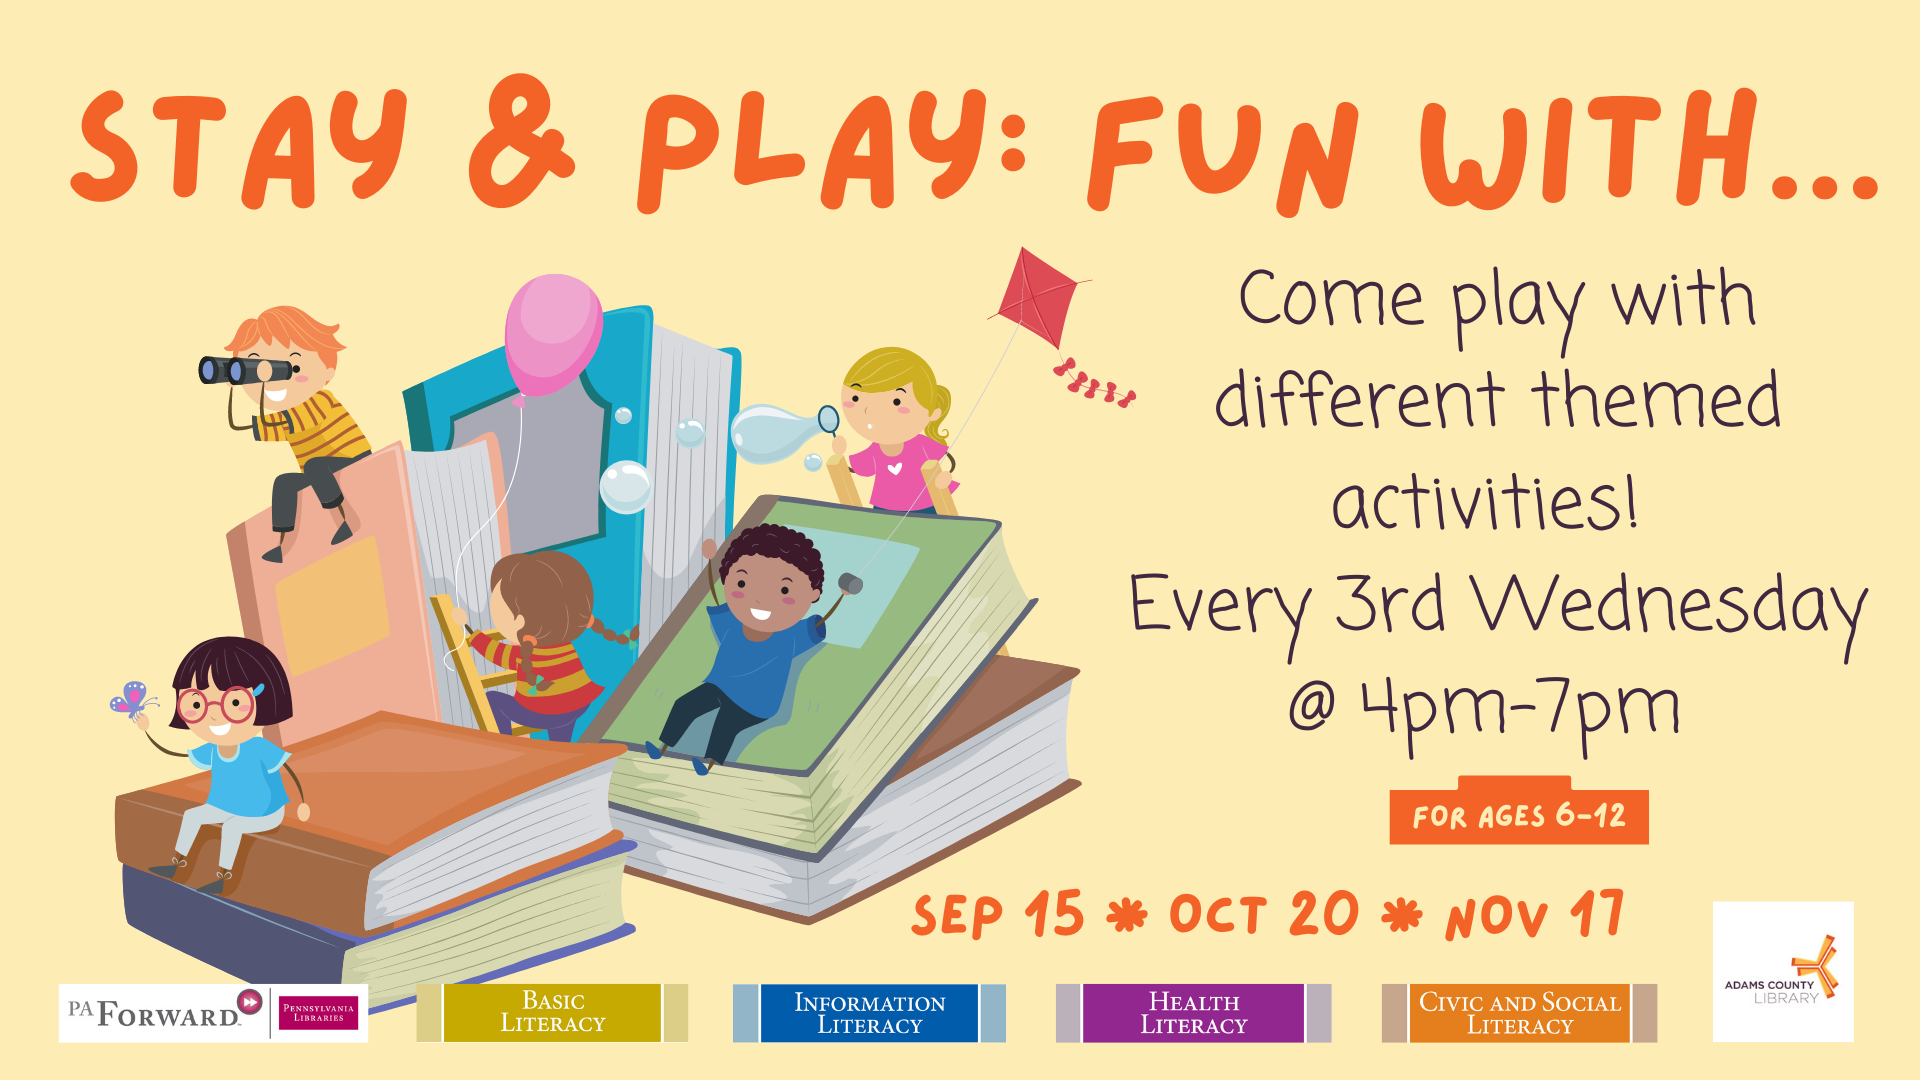 Come Stay and Play at the library with different themed activities on the third Wednesday of the month from 4pm to 7pm. For ages 6-12.